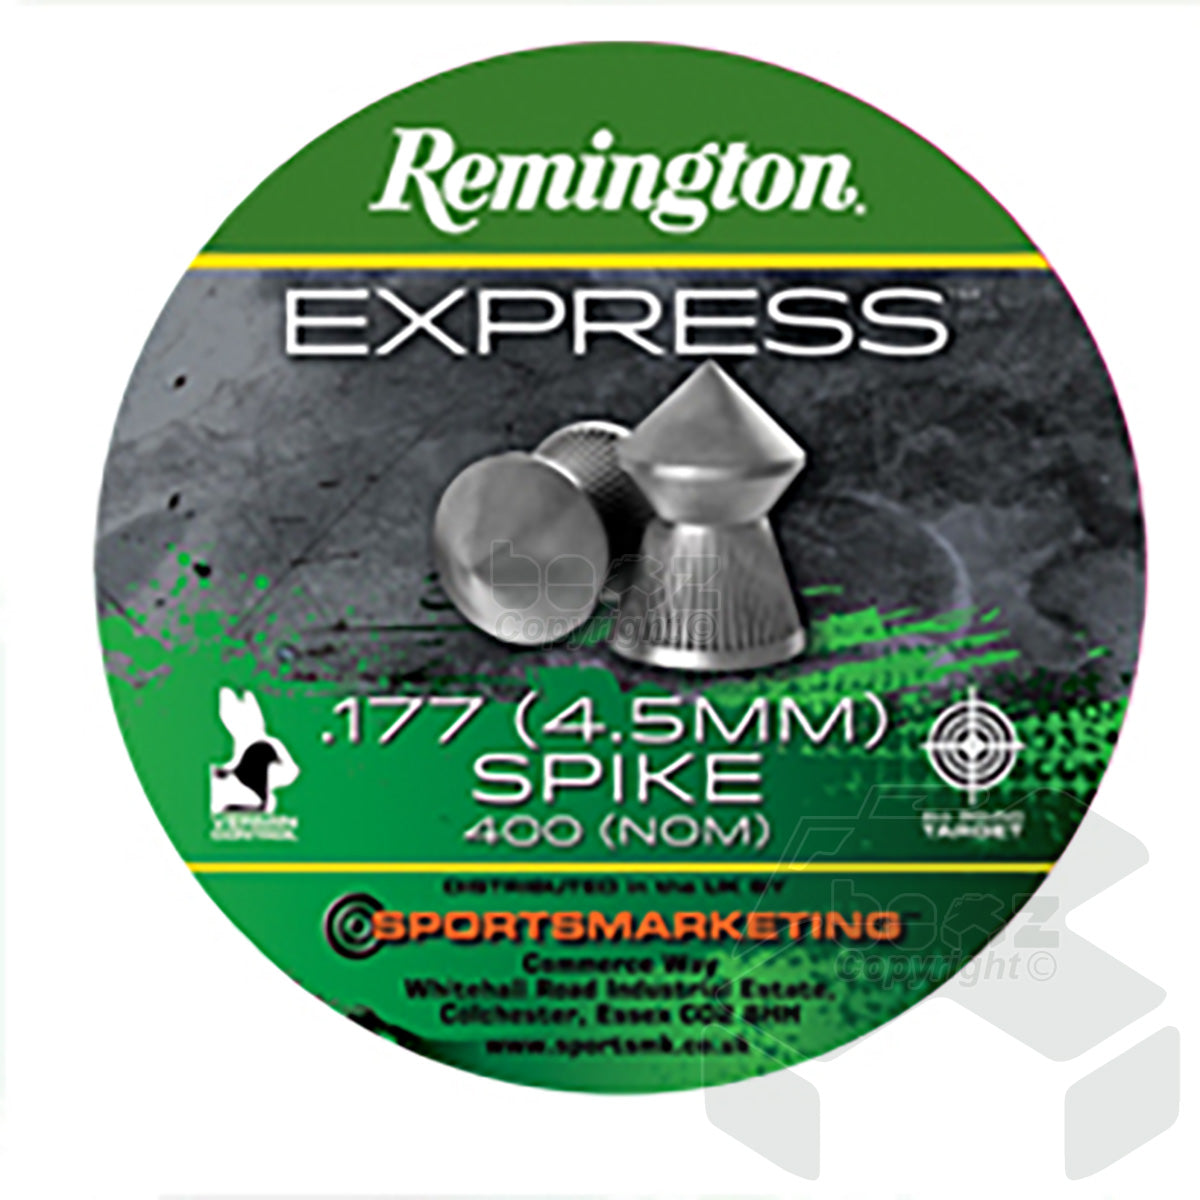 Remington Express Pointed Spike Tin of 400 - 4.5mm - 8.64 Grains - .177 Cal